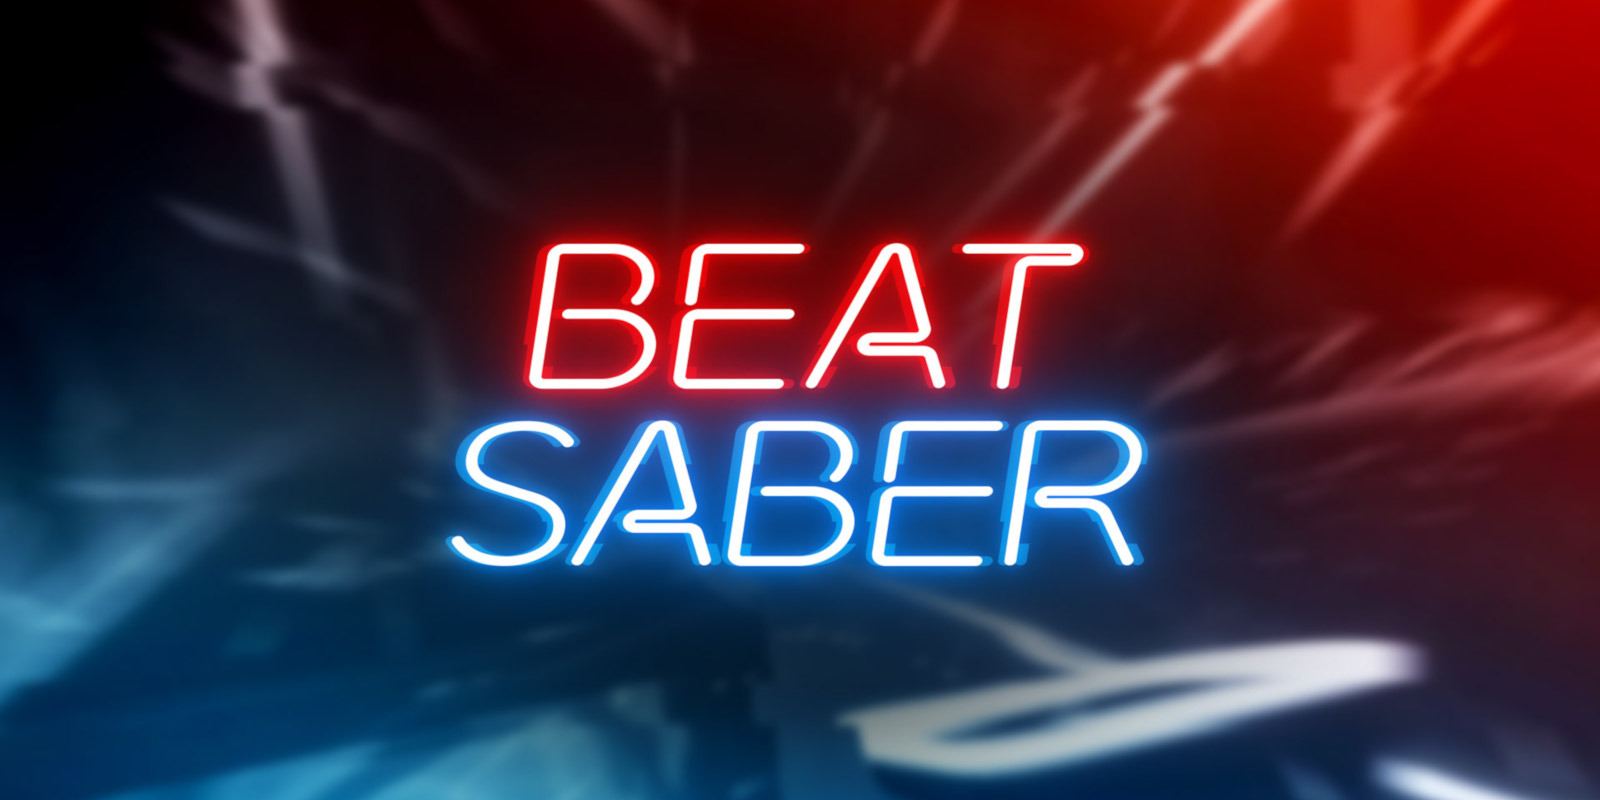 "Beat Saber" Review: King of Rhythm Games and Lives Up to the Hype